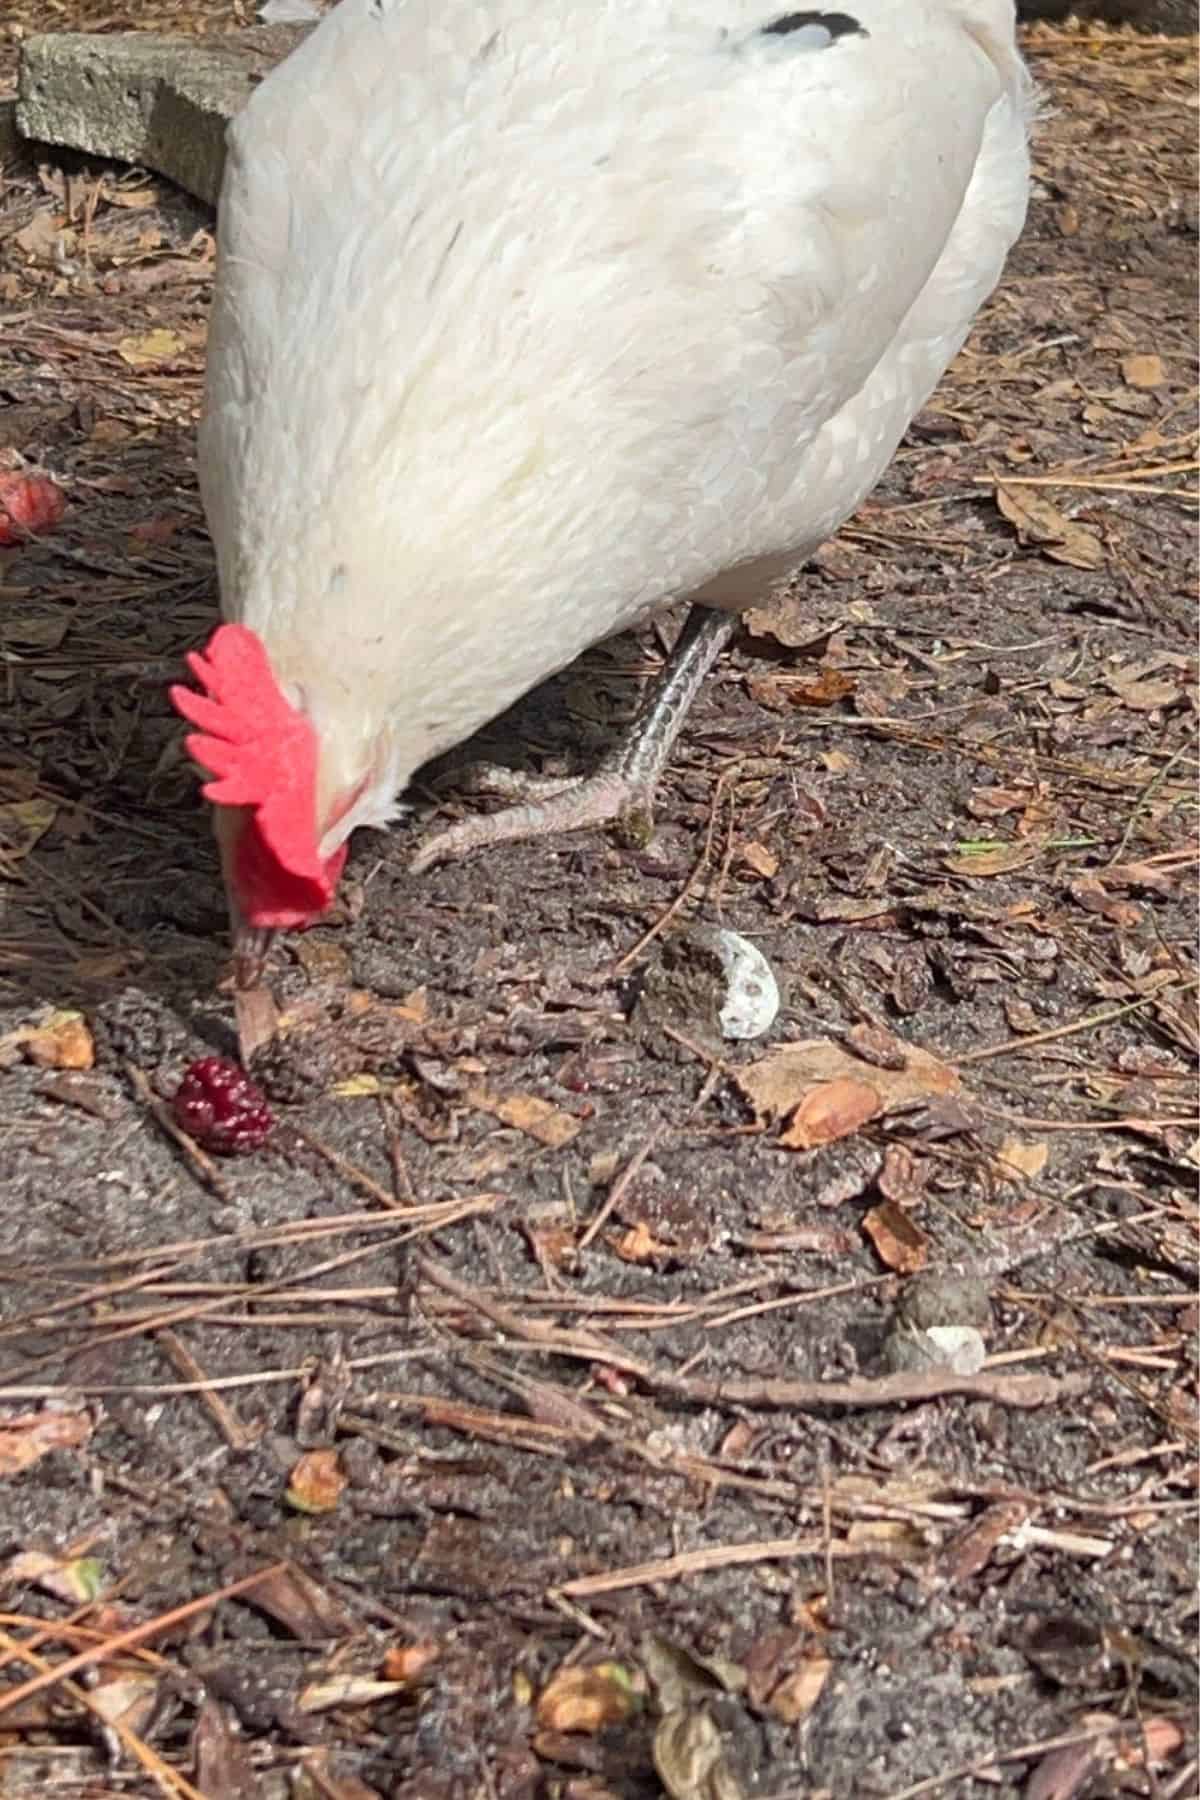 Chickens eating raspberries off the ground.